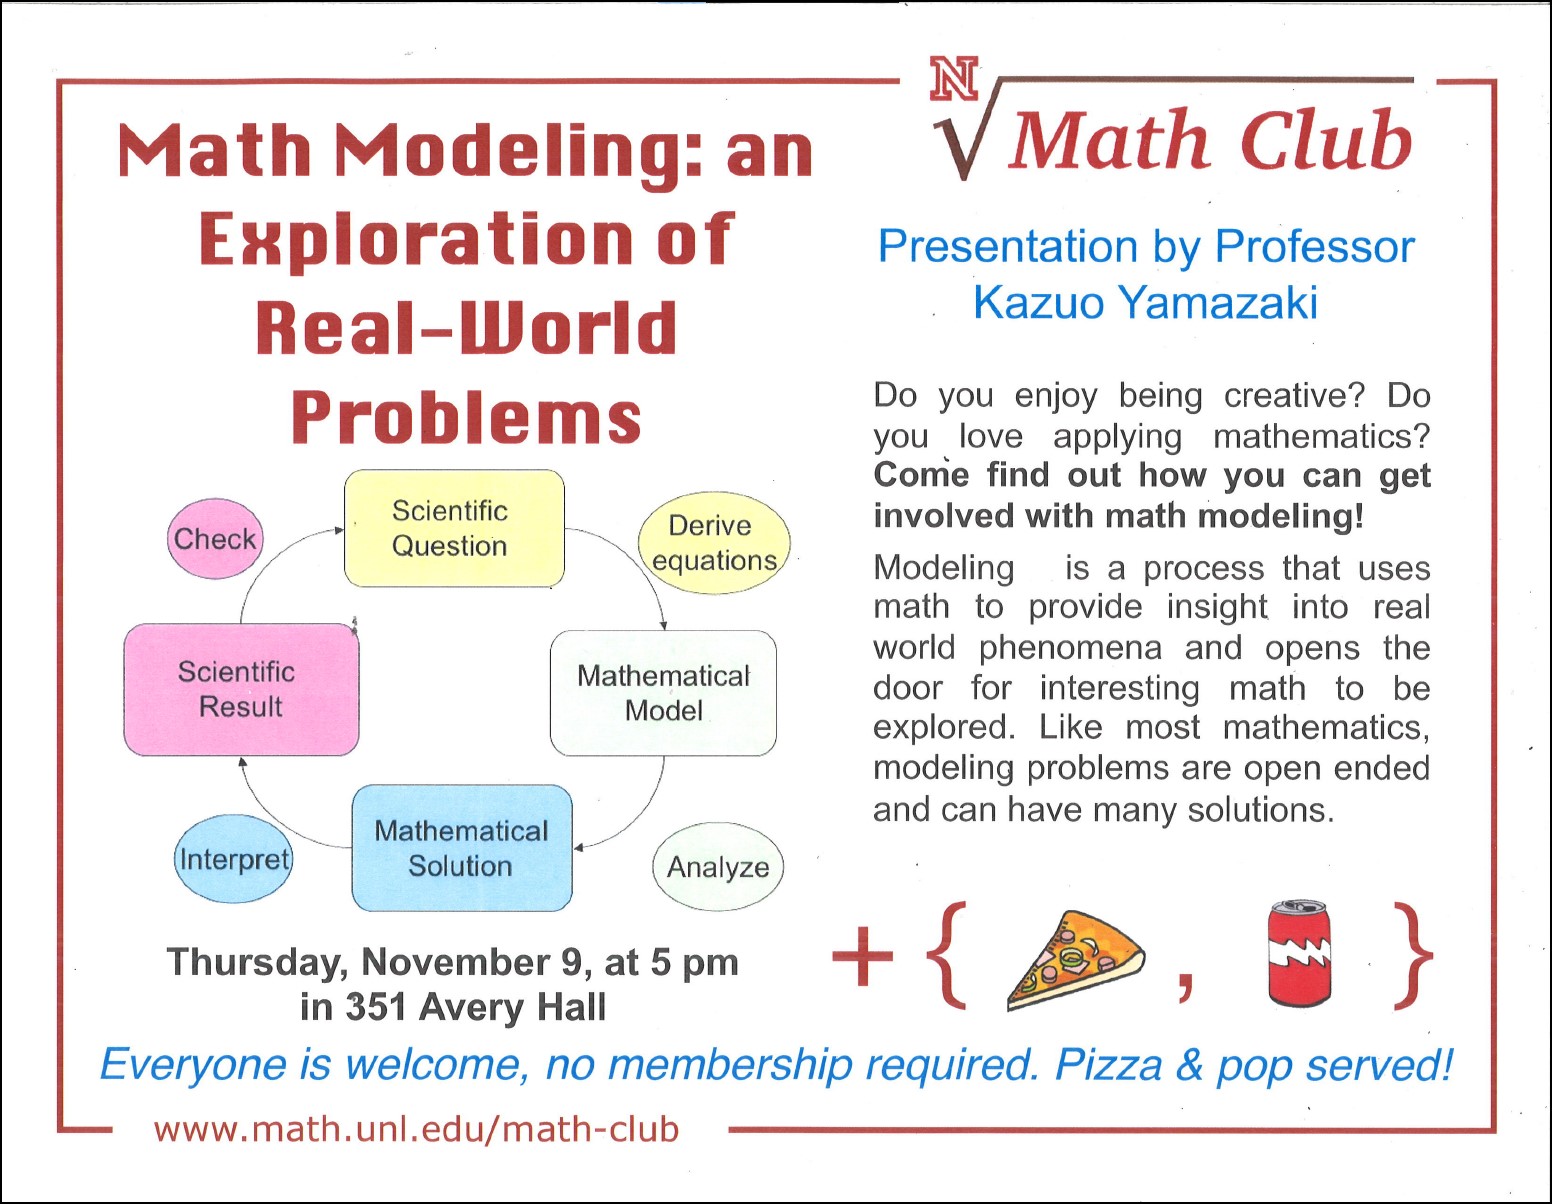 Math Club: Math Modeling: An Exploration of Real-World Problems